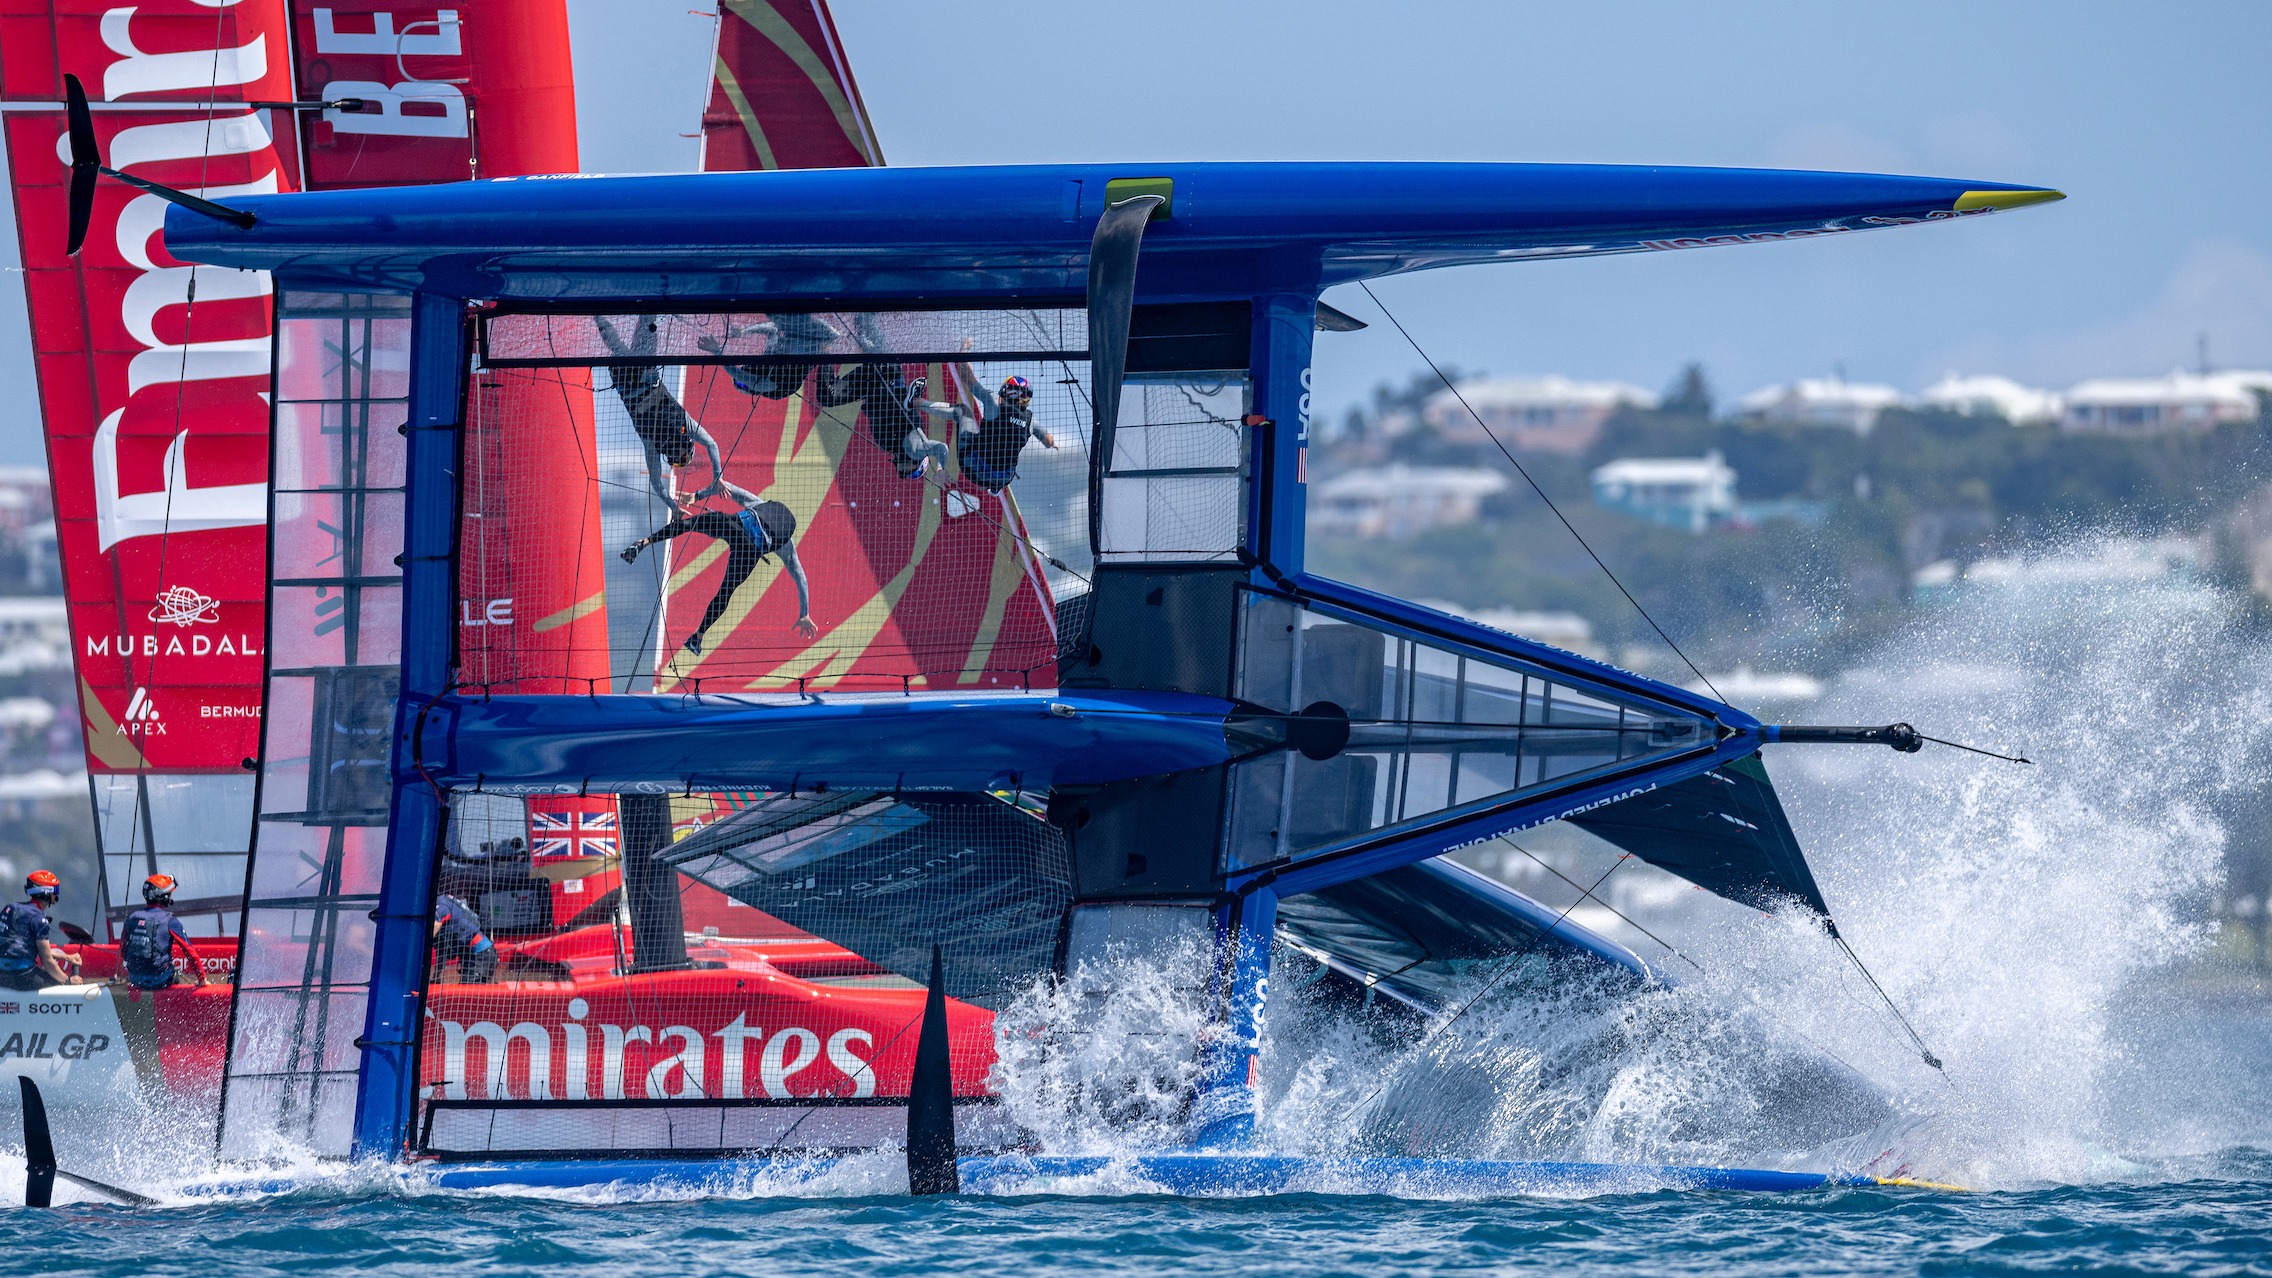 Season 4 // United States capsize in Bermuda with Emirates GBR in background